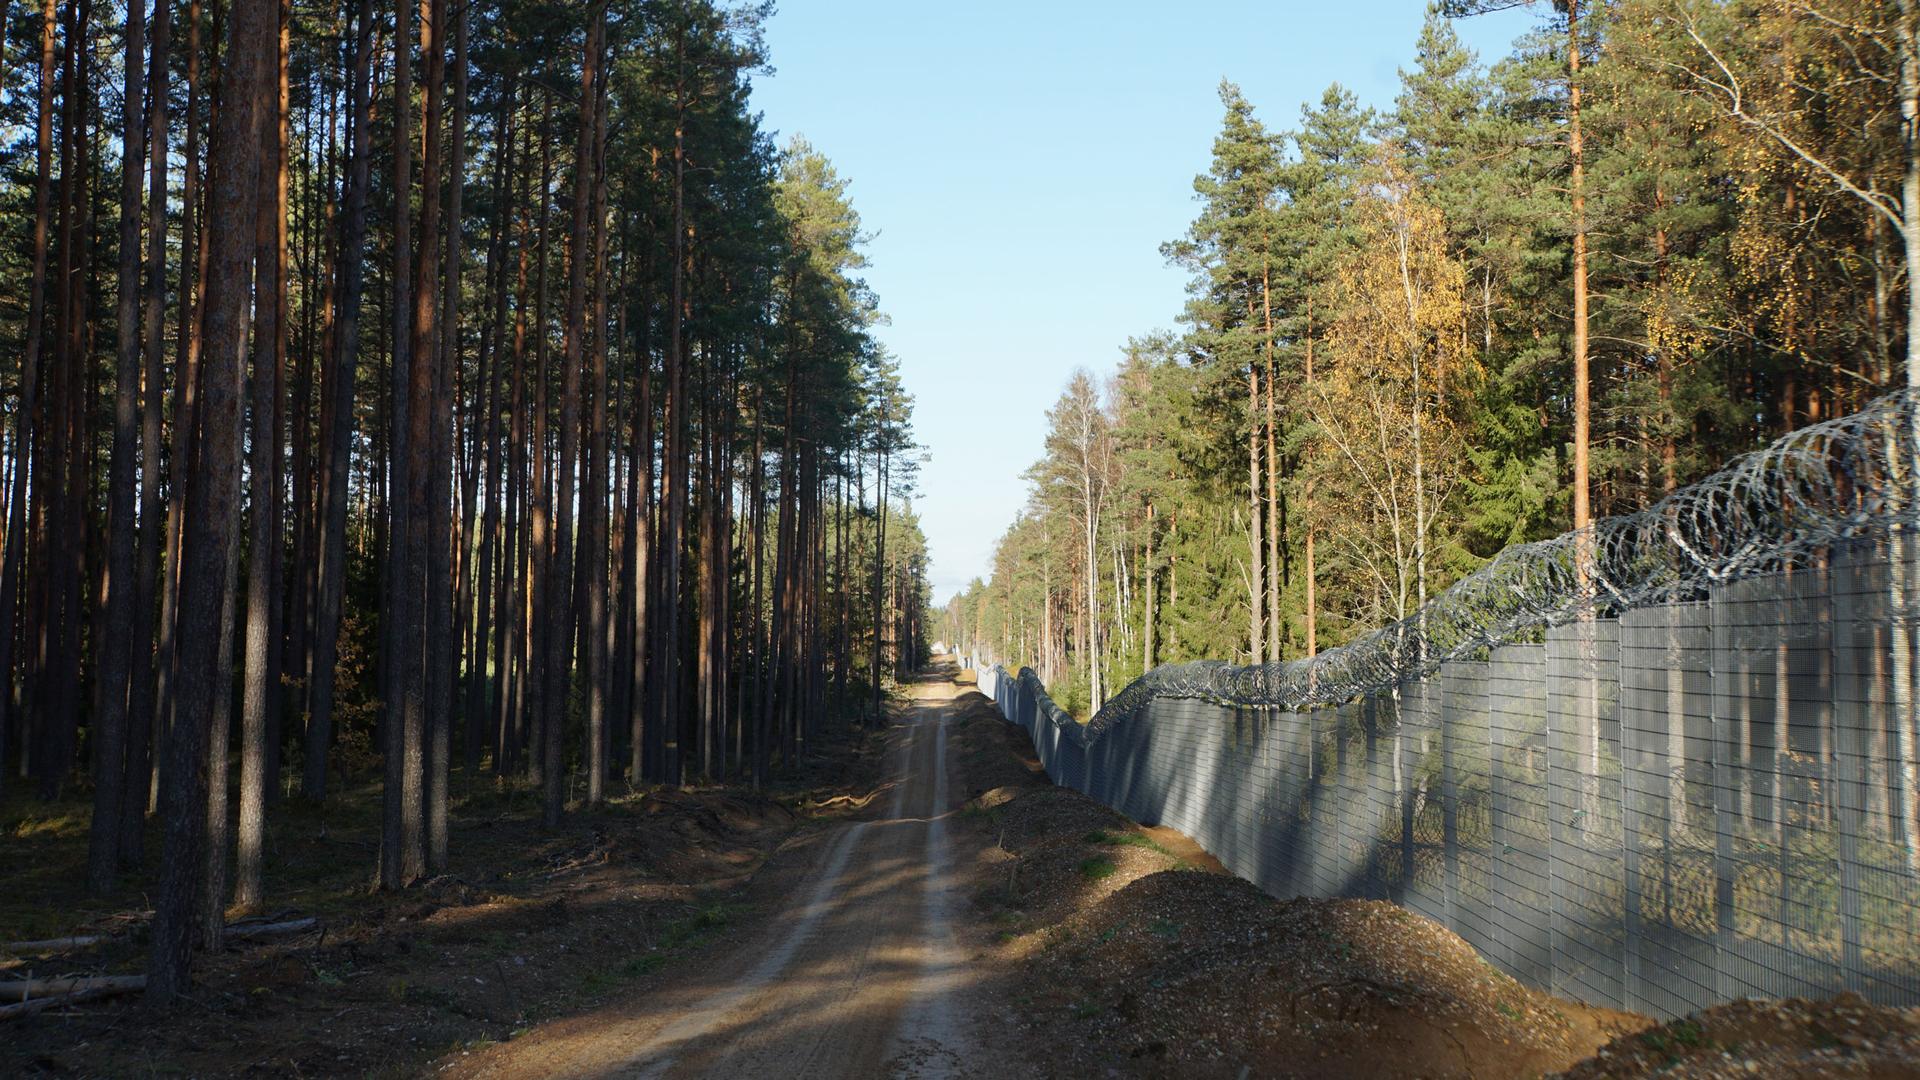 The border between Belarus and Latvia is about 100 miles long and is partially separated by a fence monitored by border officers.